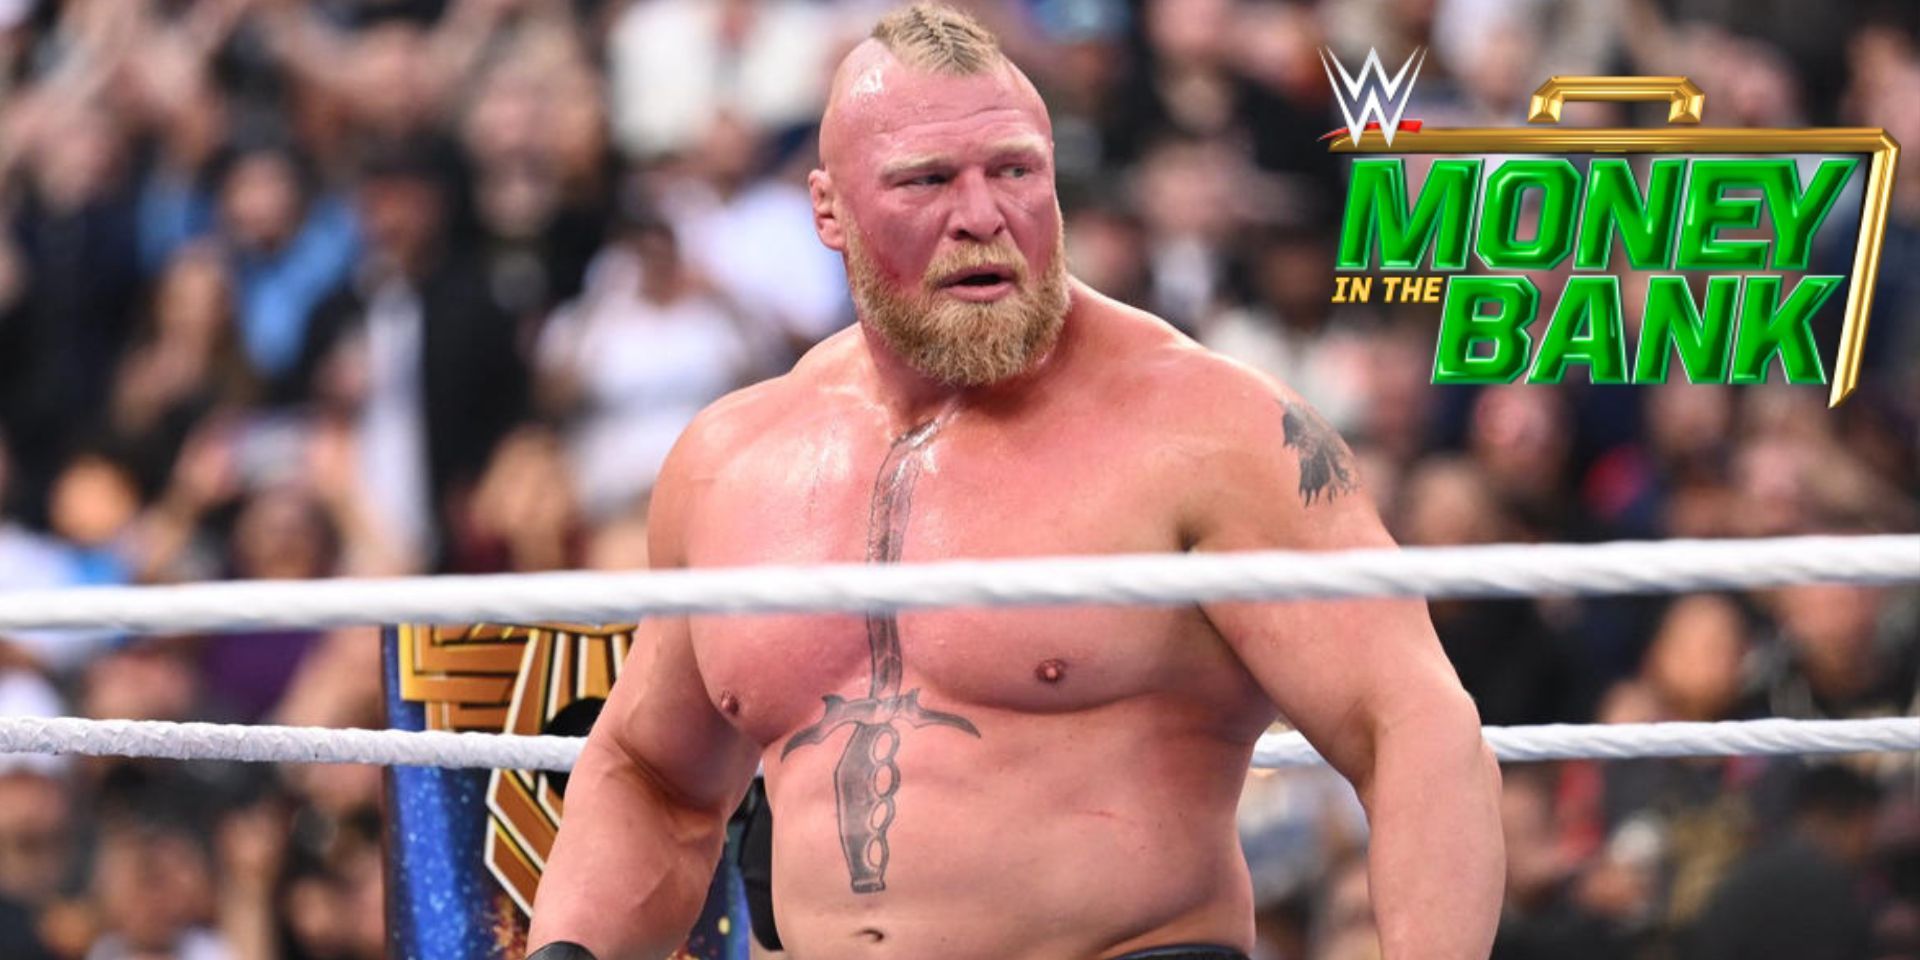 Brock Lesnar is reportedly set for Money in the Bank